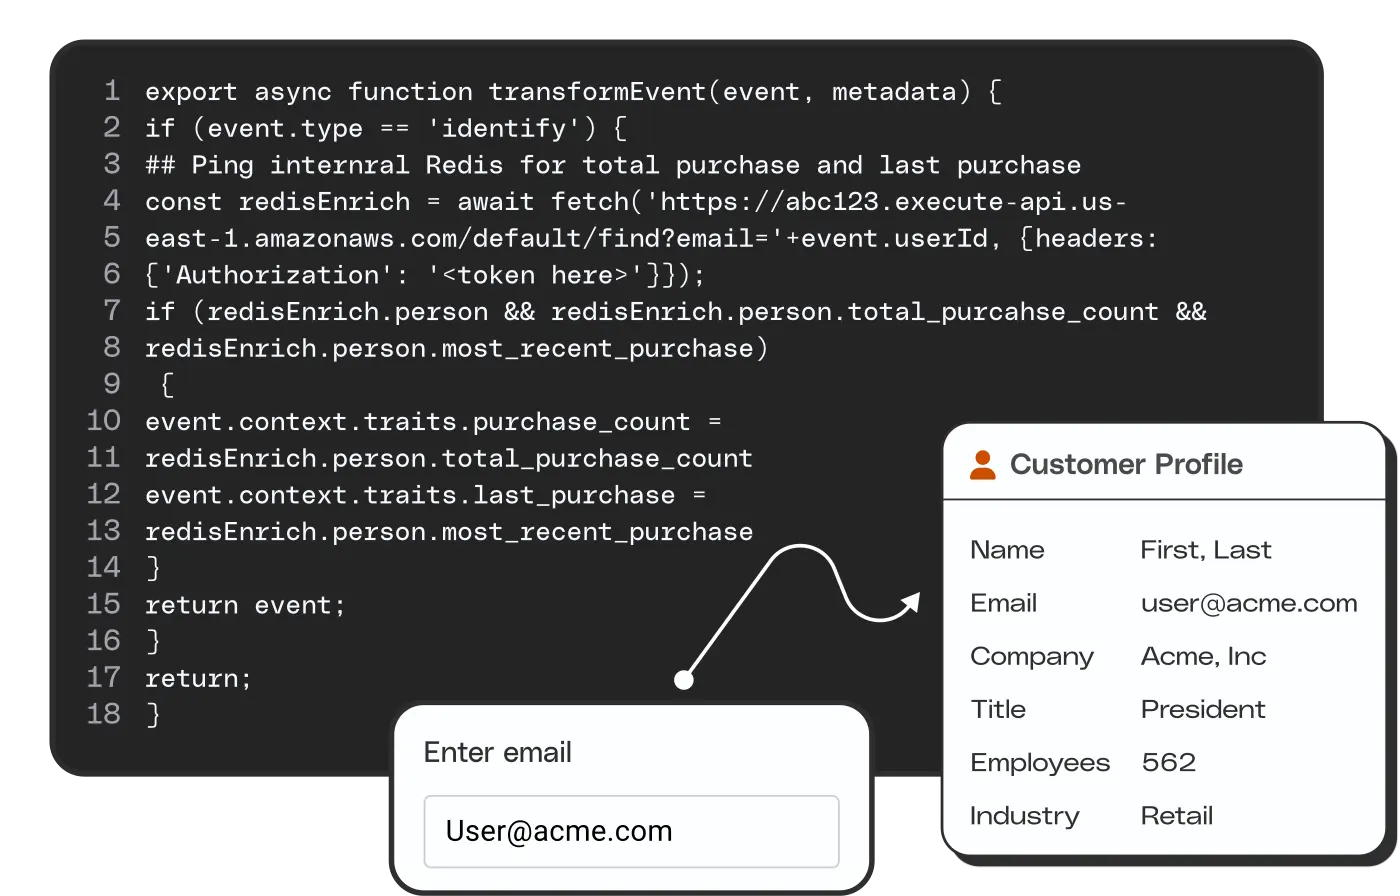 Marketing wants to enrich new customer profiles from an internal Redis data store